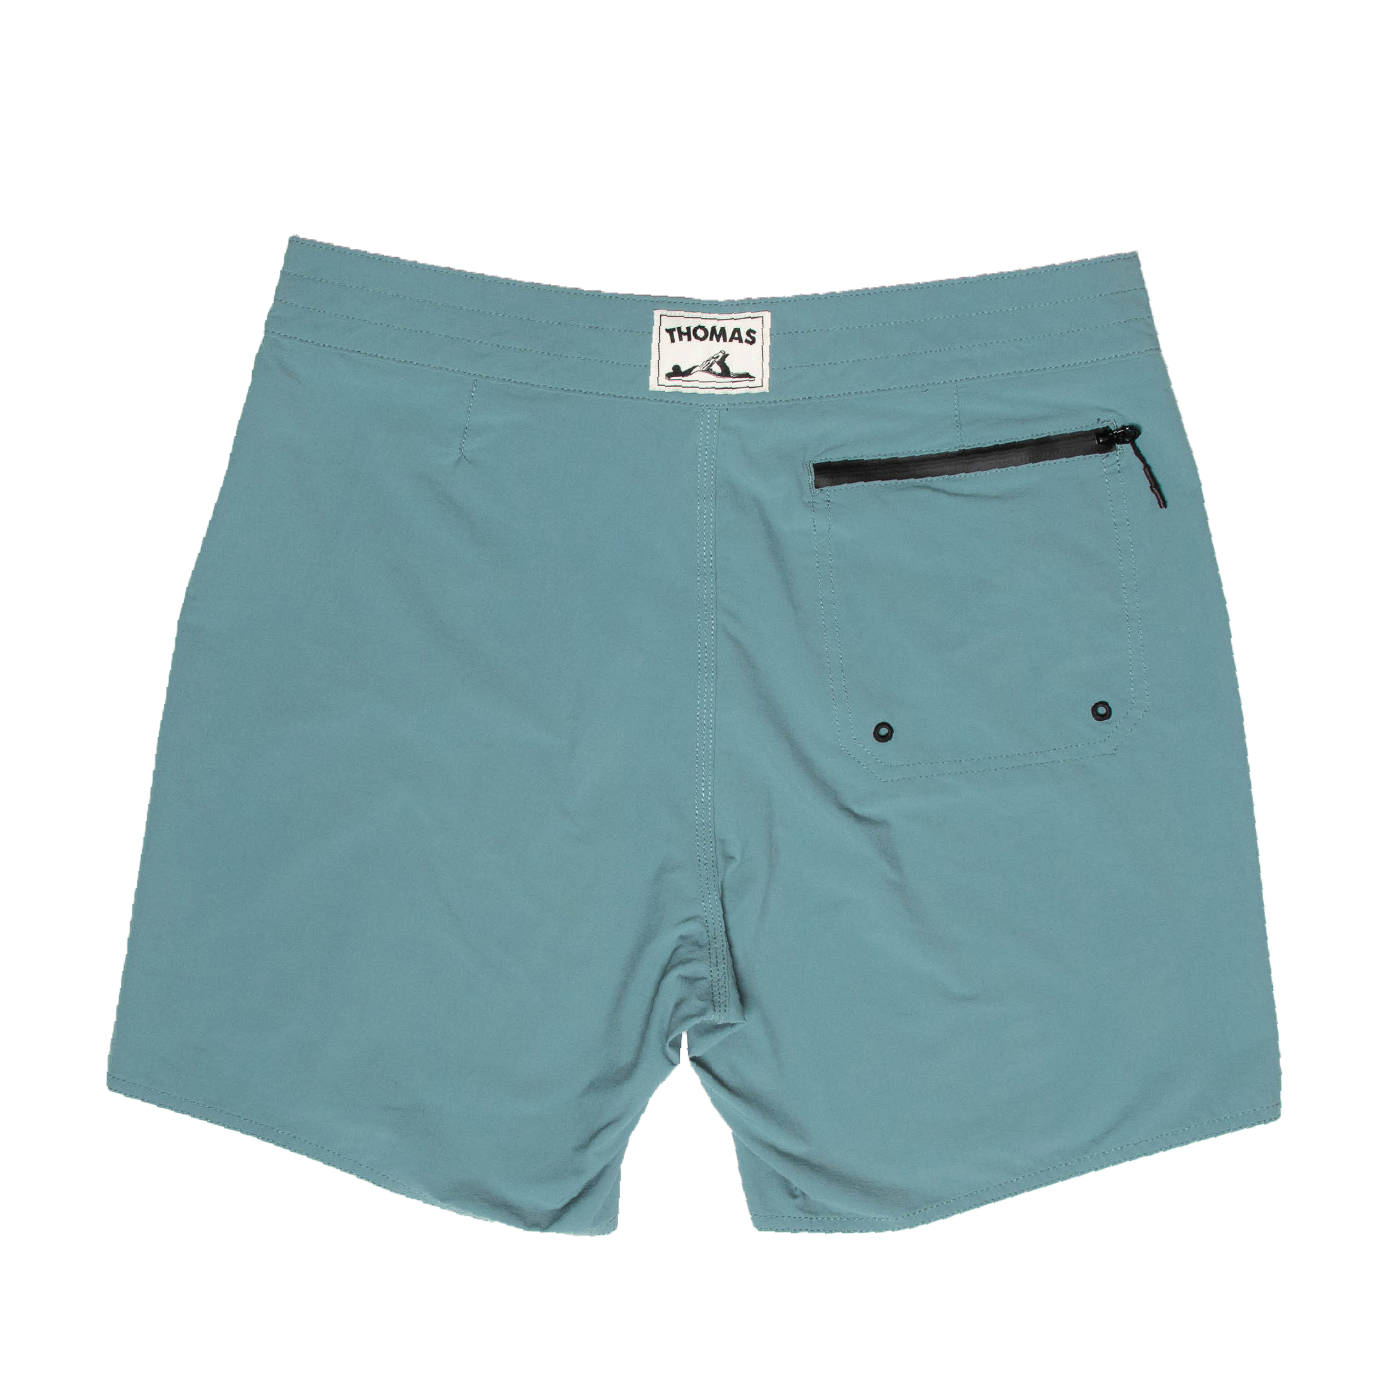 The Tom Teal Board Shorts